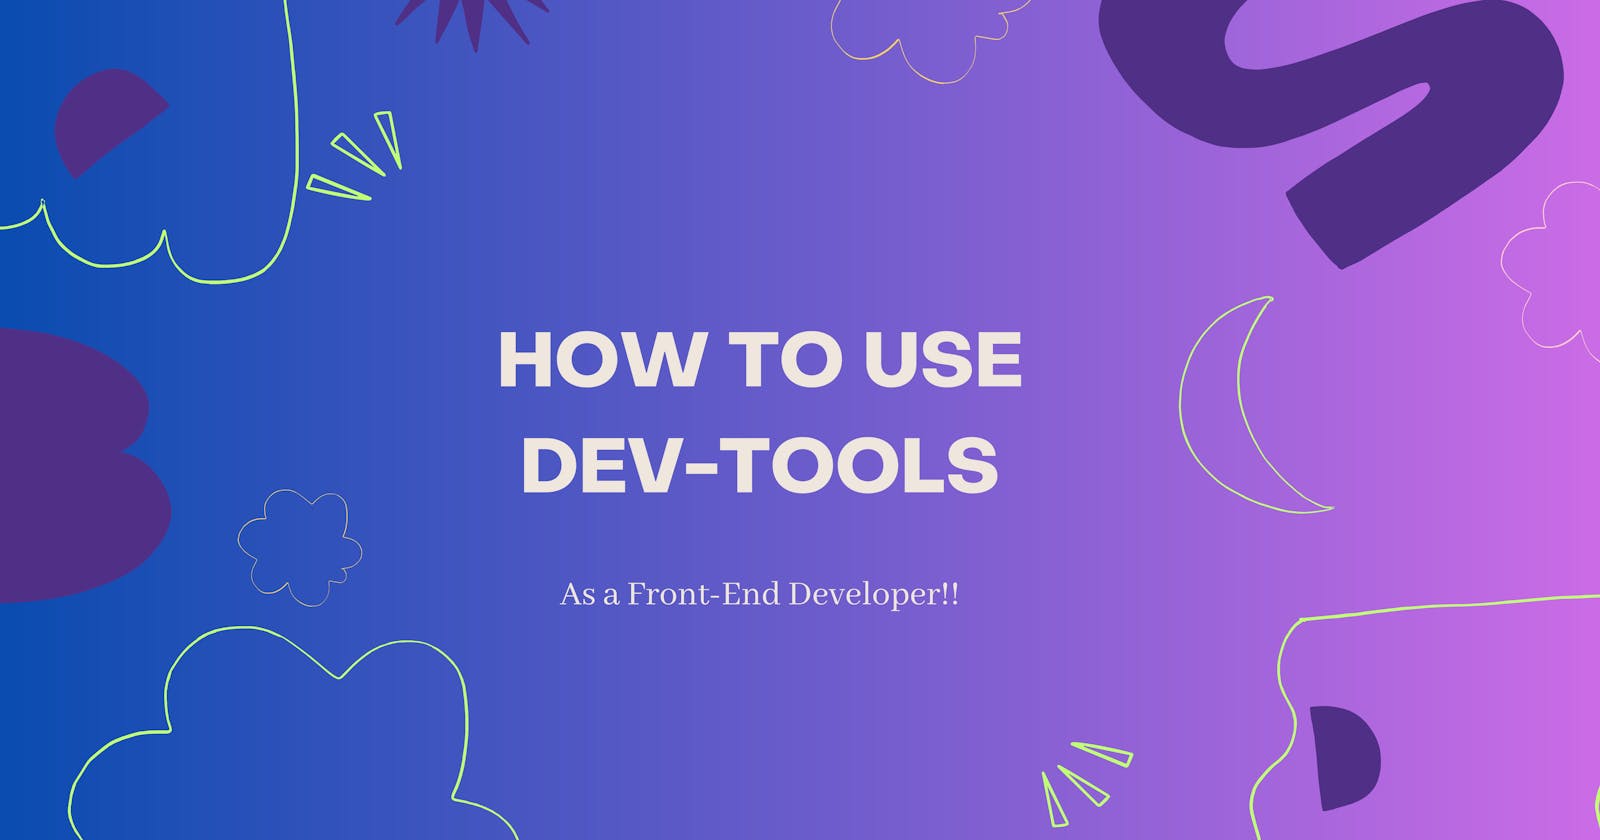 How to use Chrome Dev-tools as a Front-End Developer!